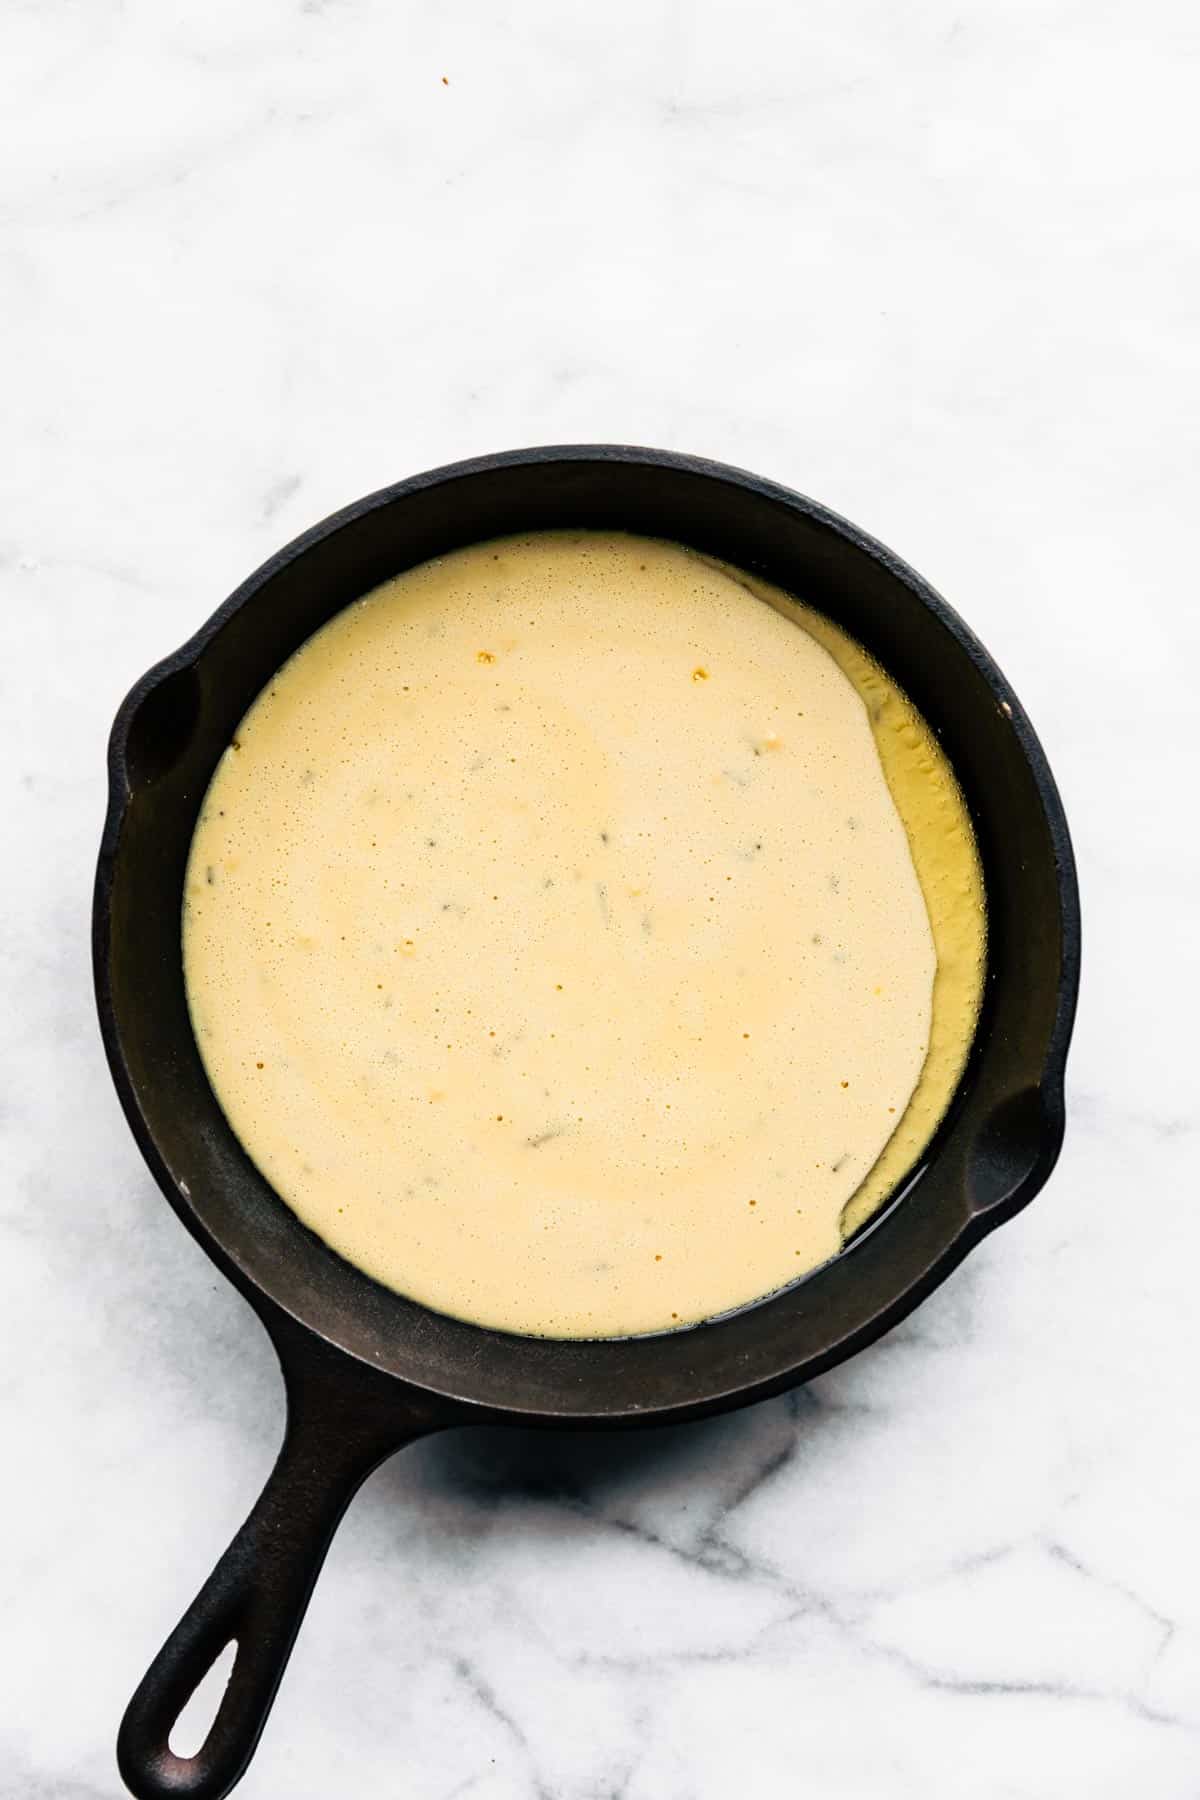 Uncooked socca batter and oil in cast iron pan